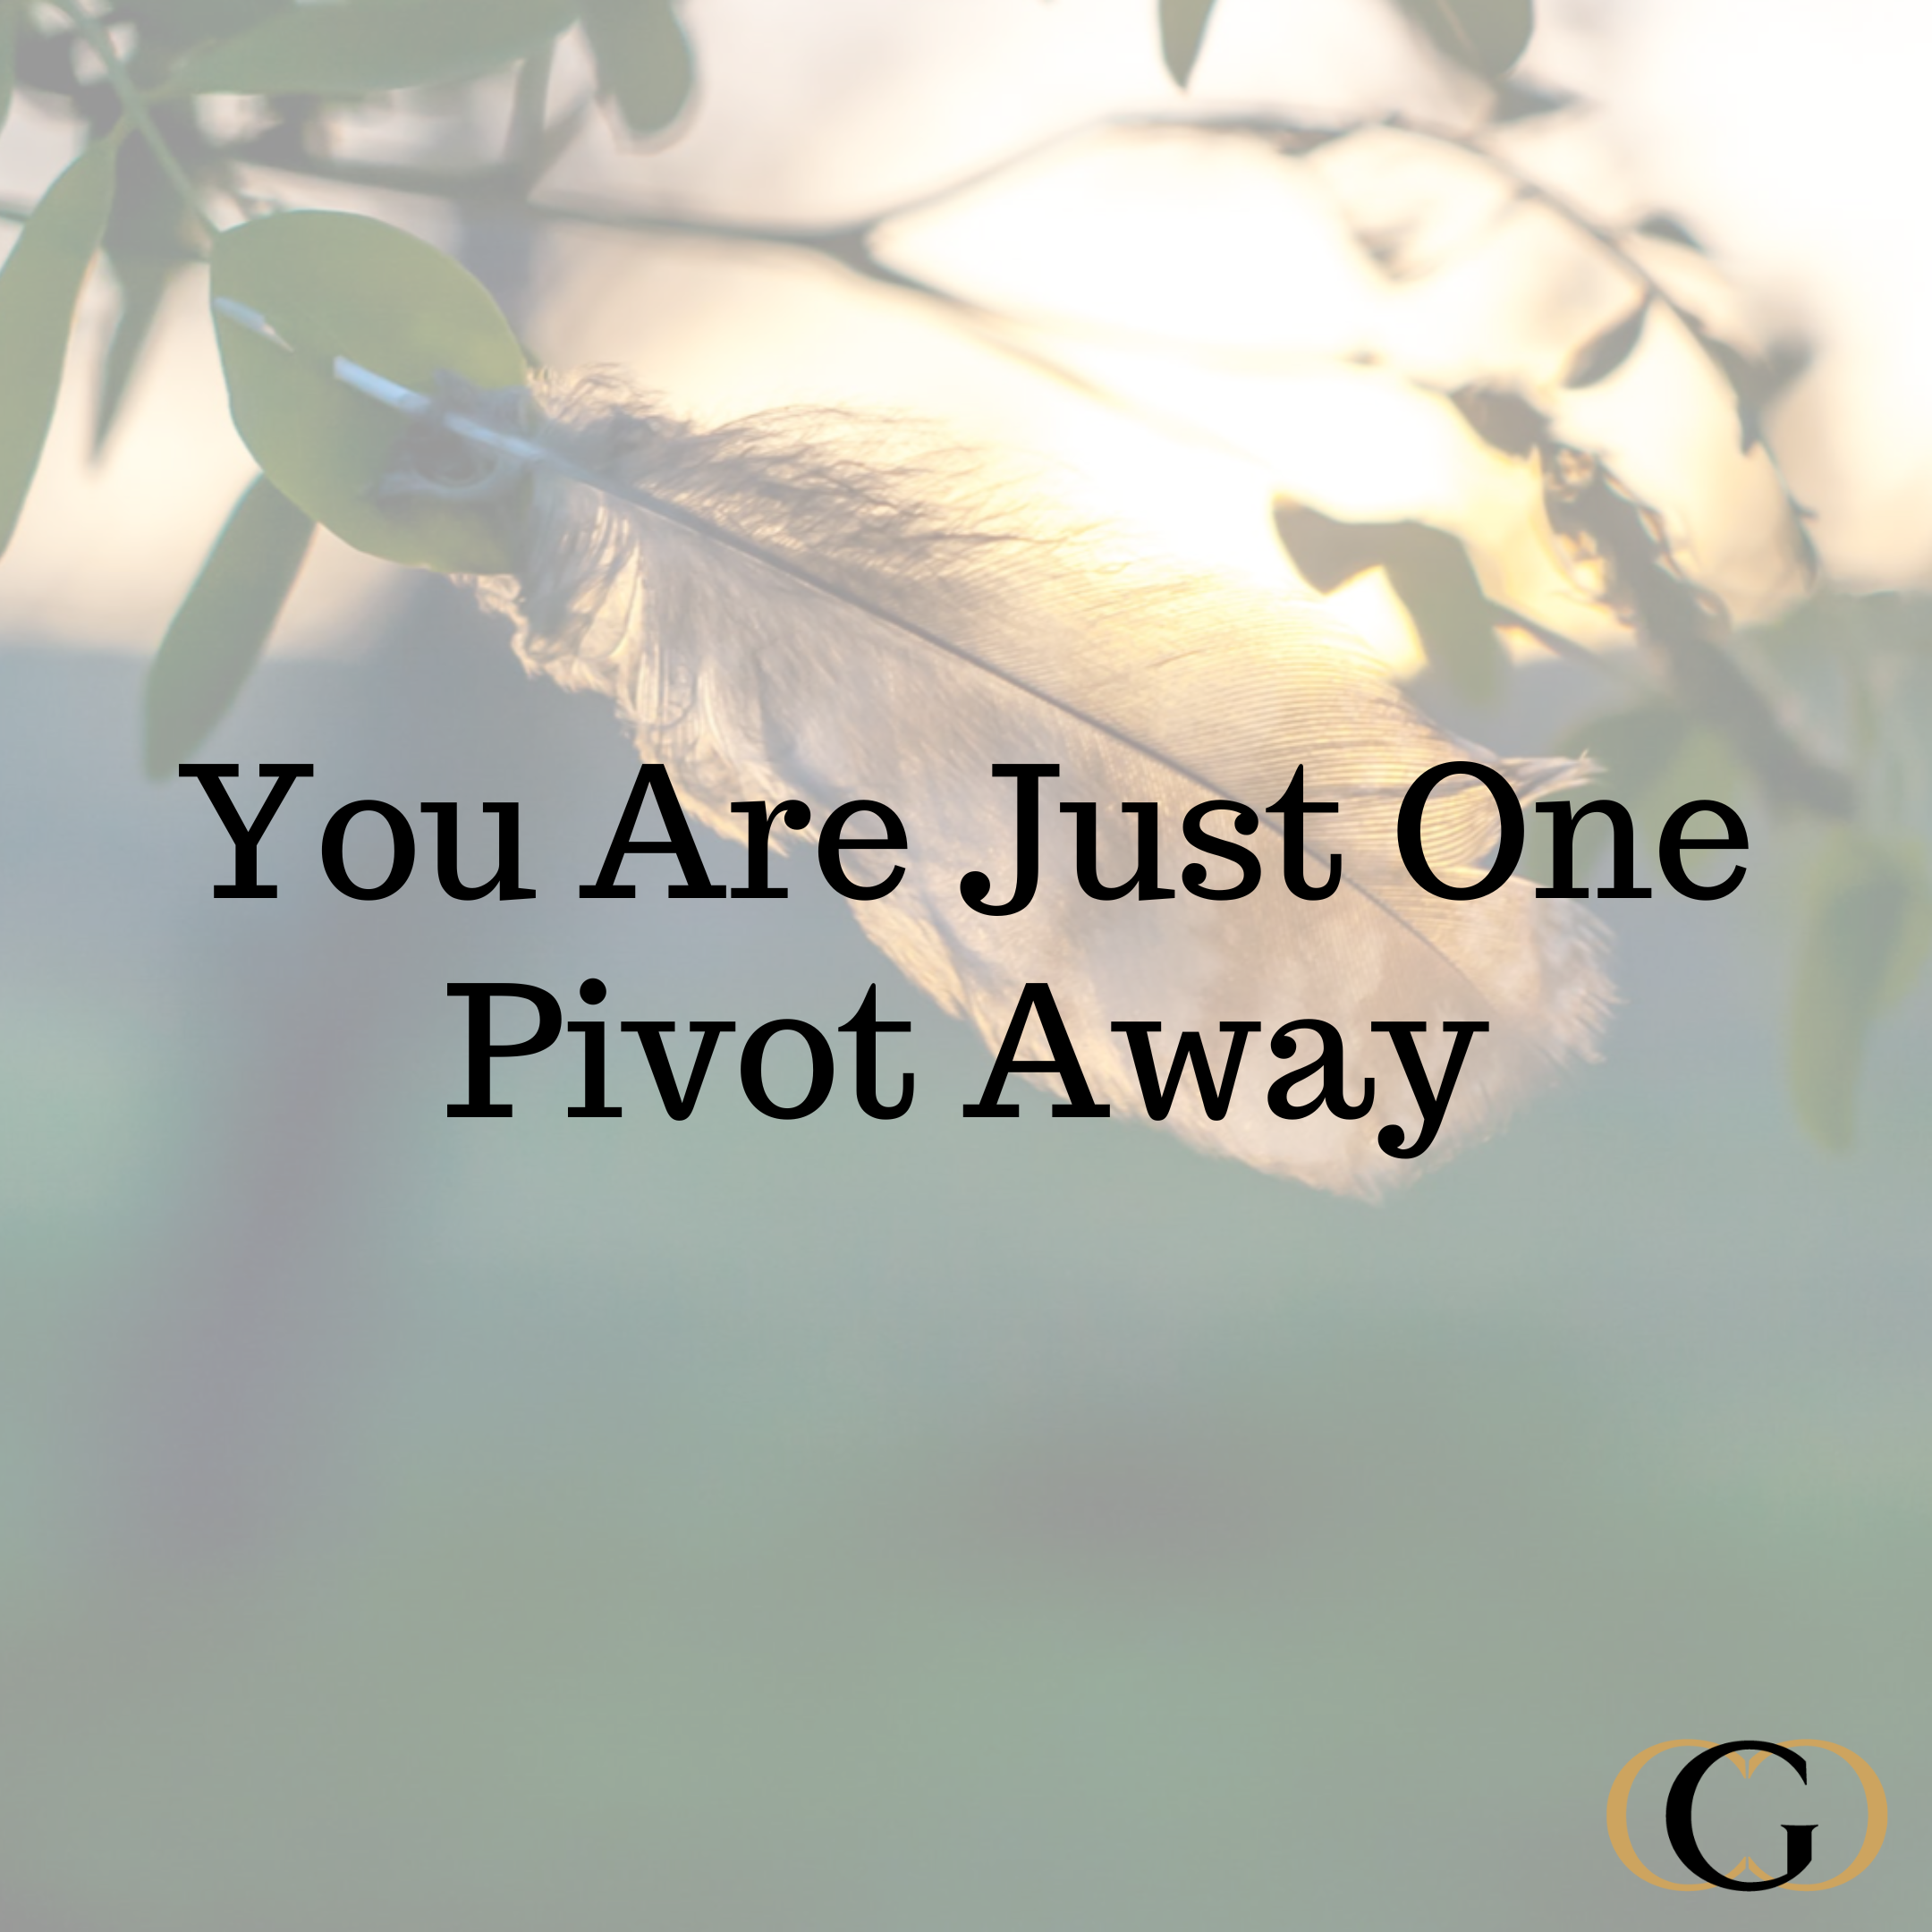 You Are Just One Pivot Away